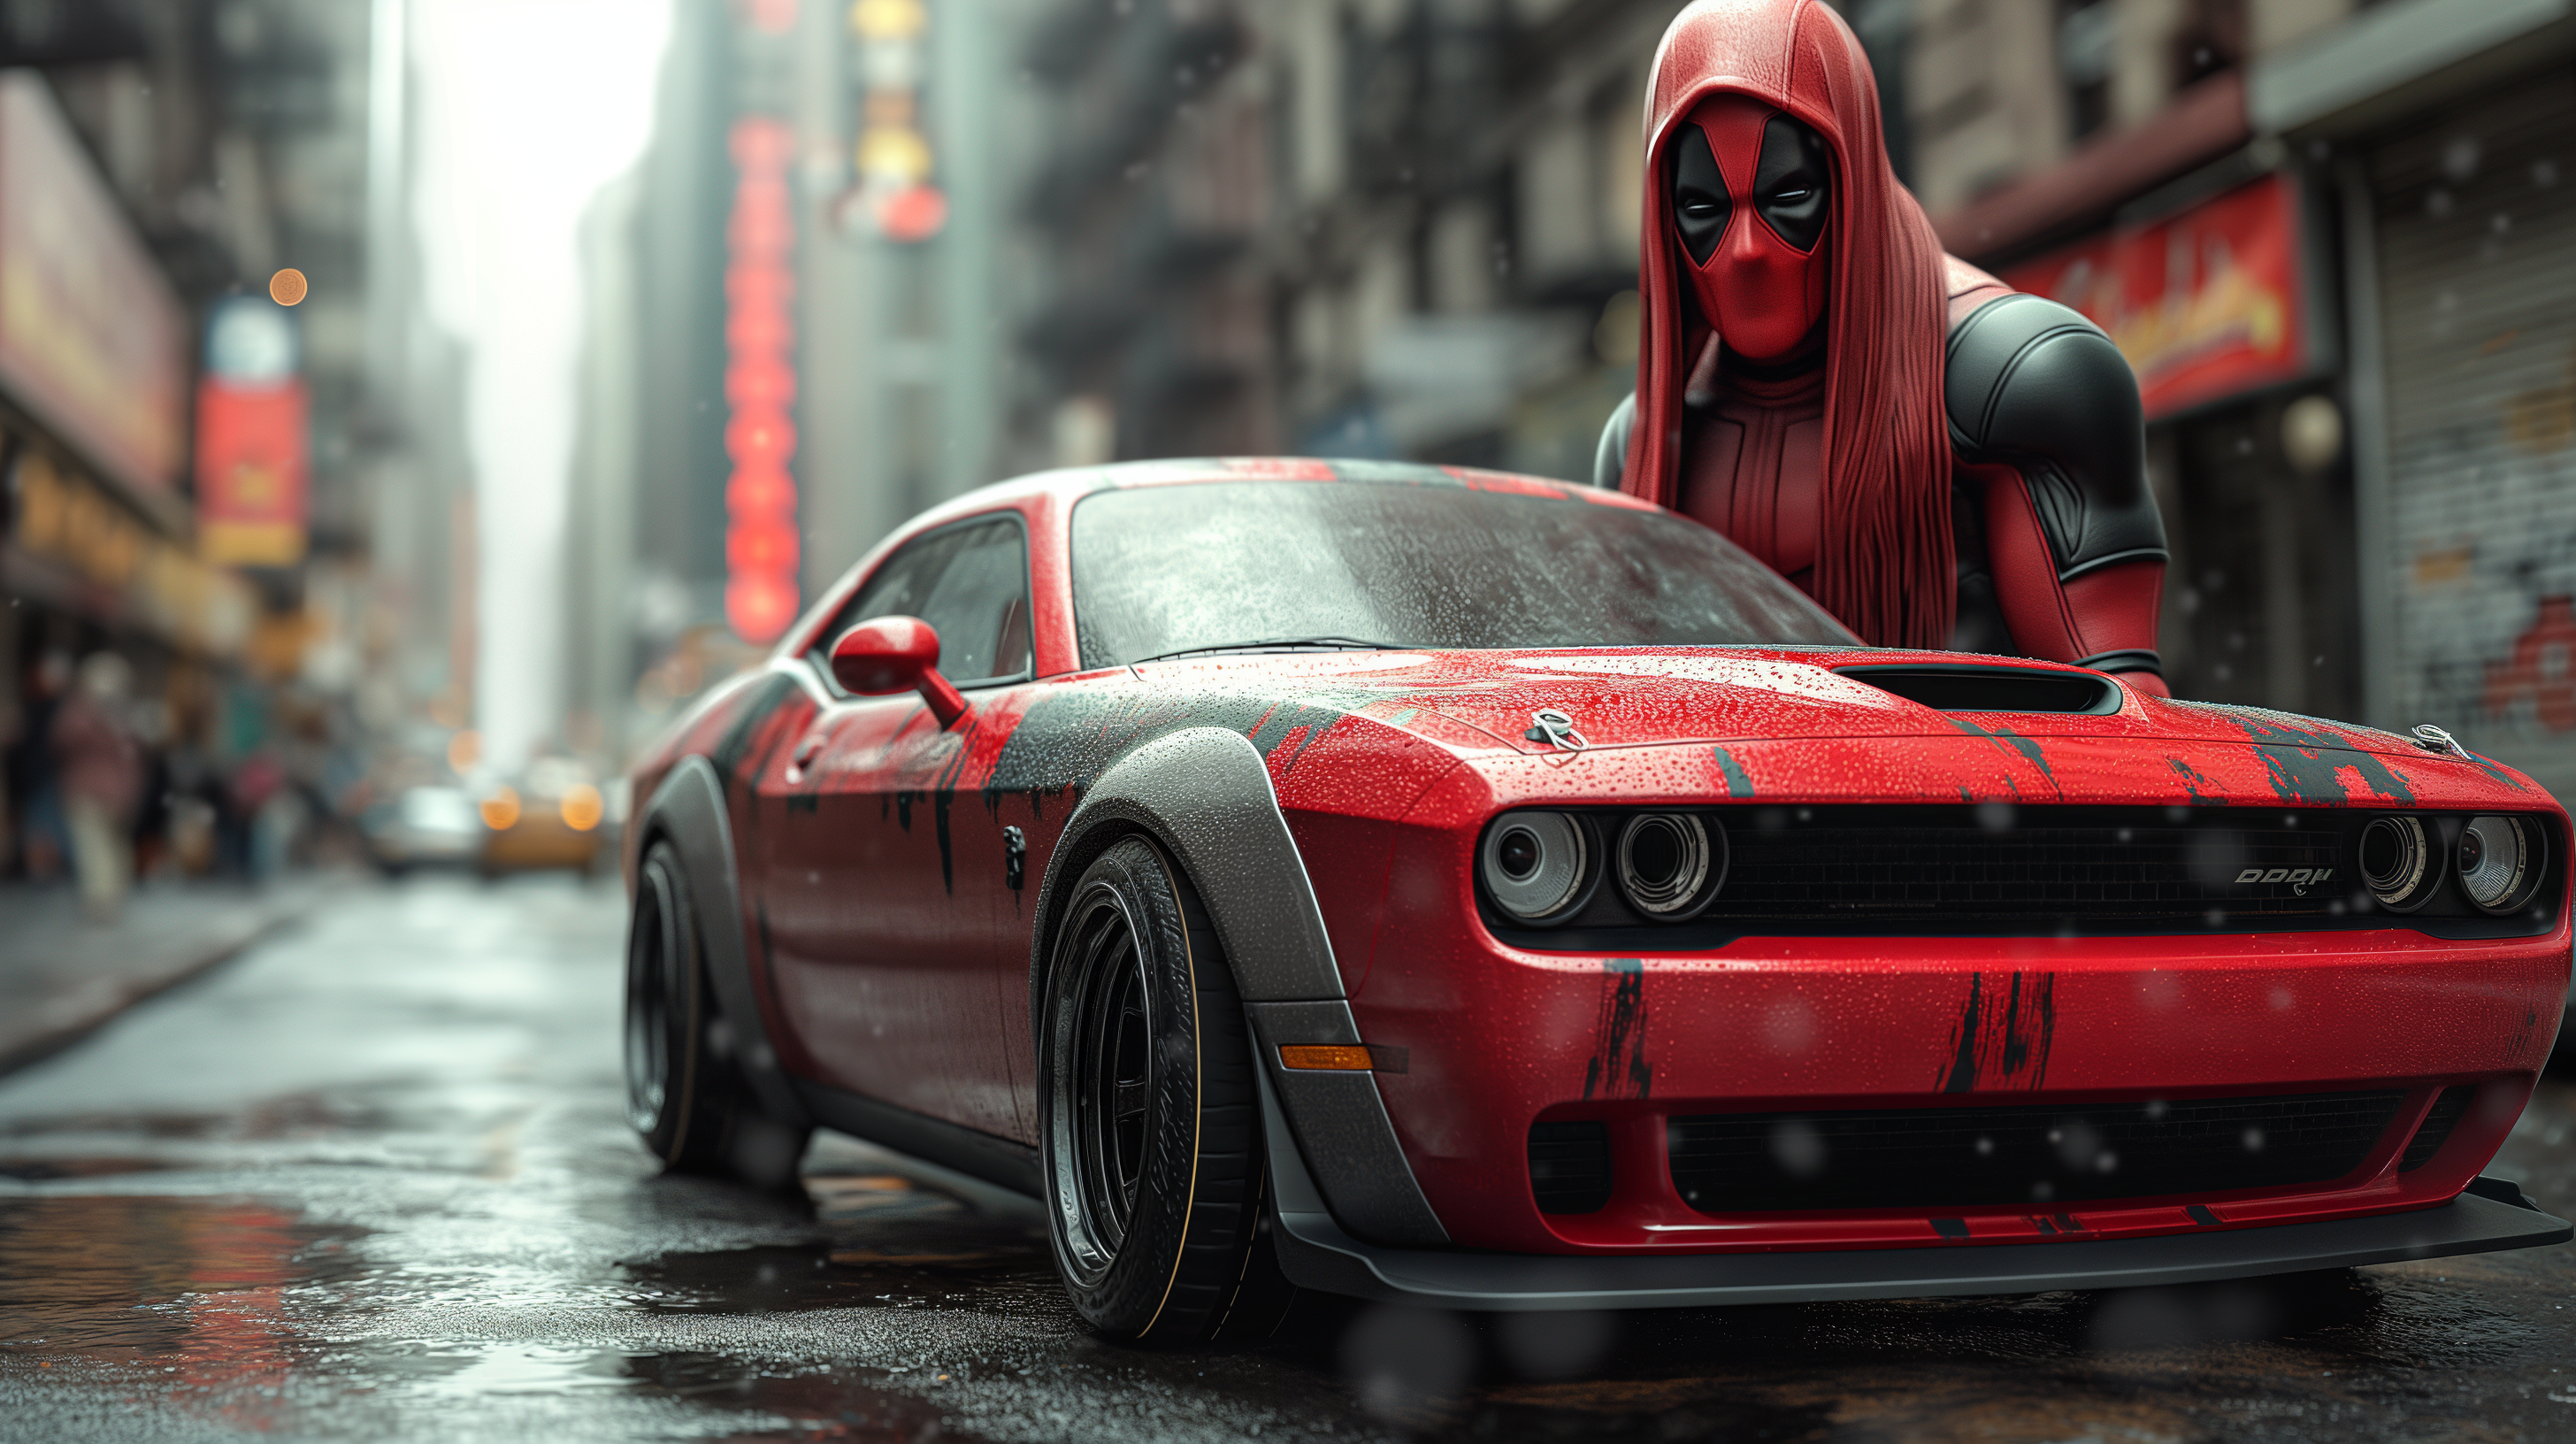 General 2912x1632 AI art Dodge Challenger Deadpool vehicle frontal view red cars depth of field closeup building wet road superhero reflection wet headlights car road